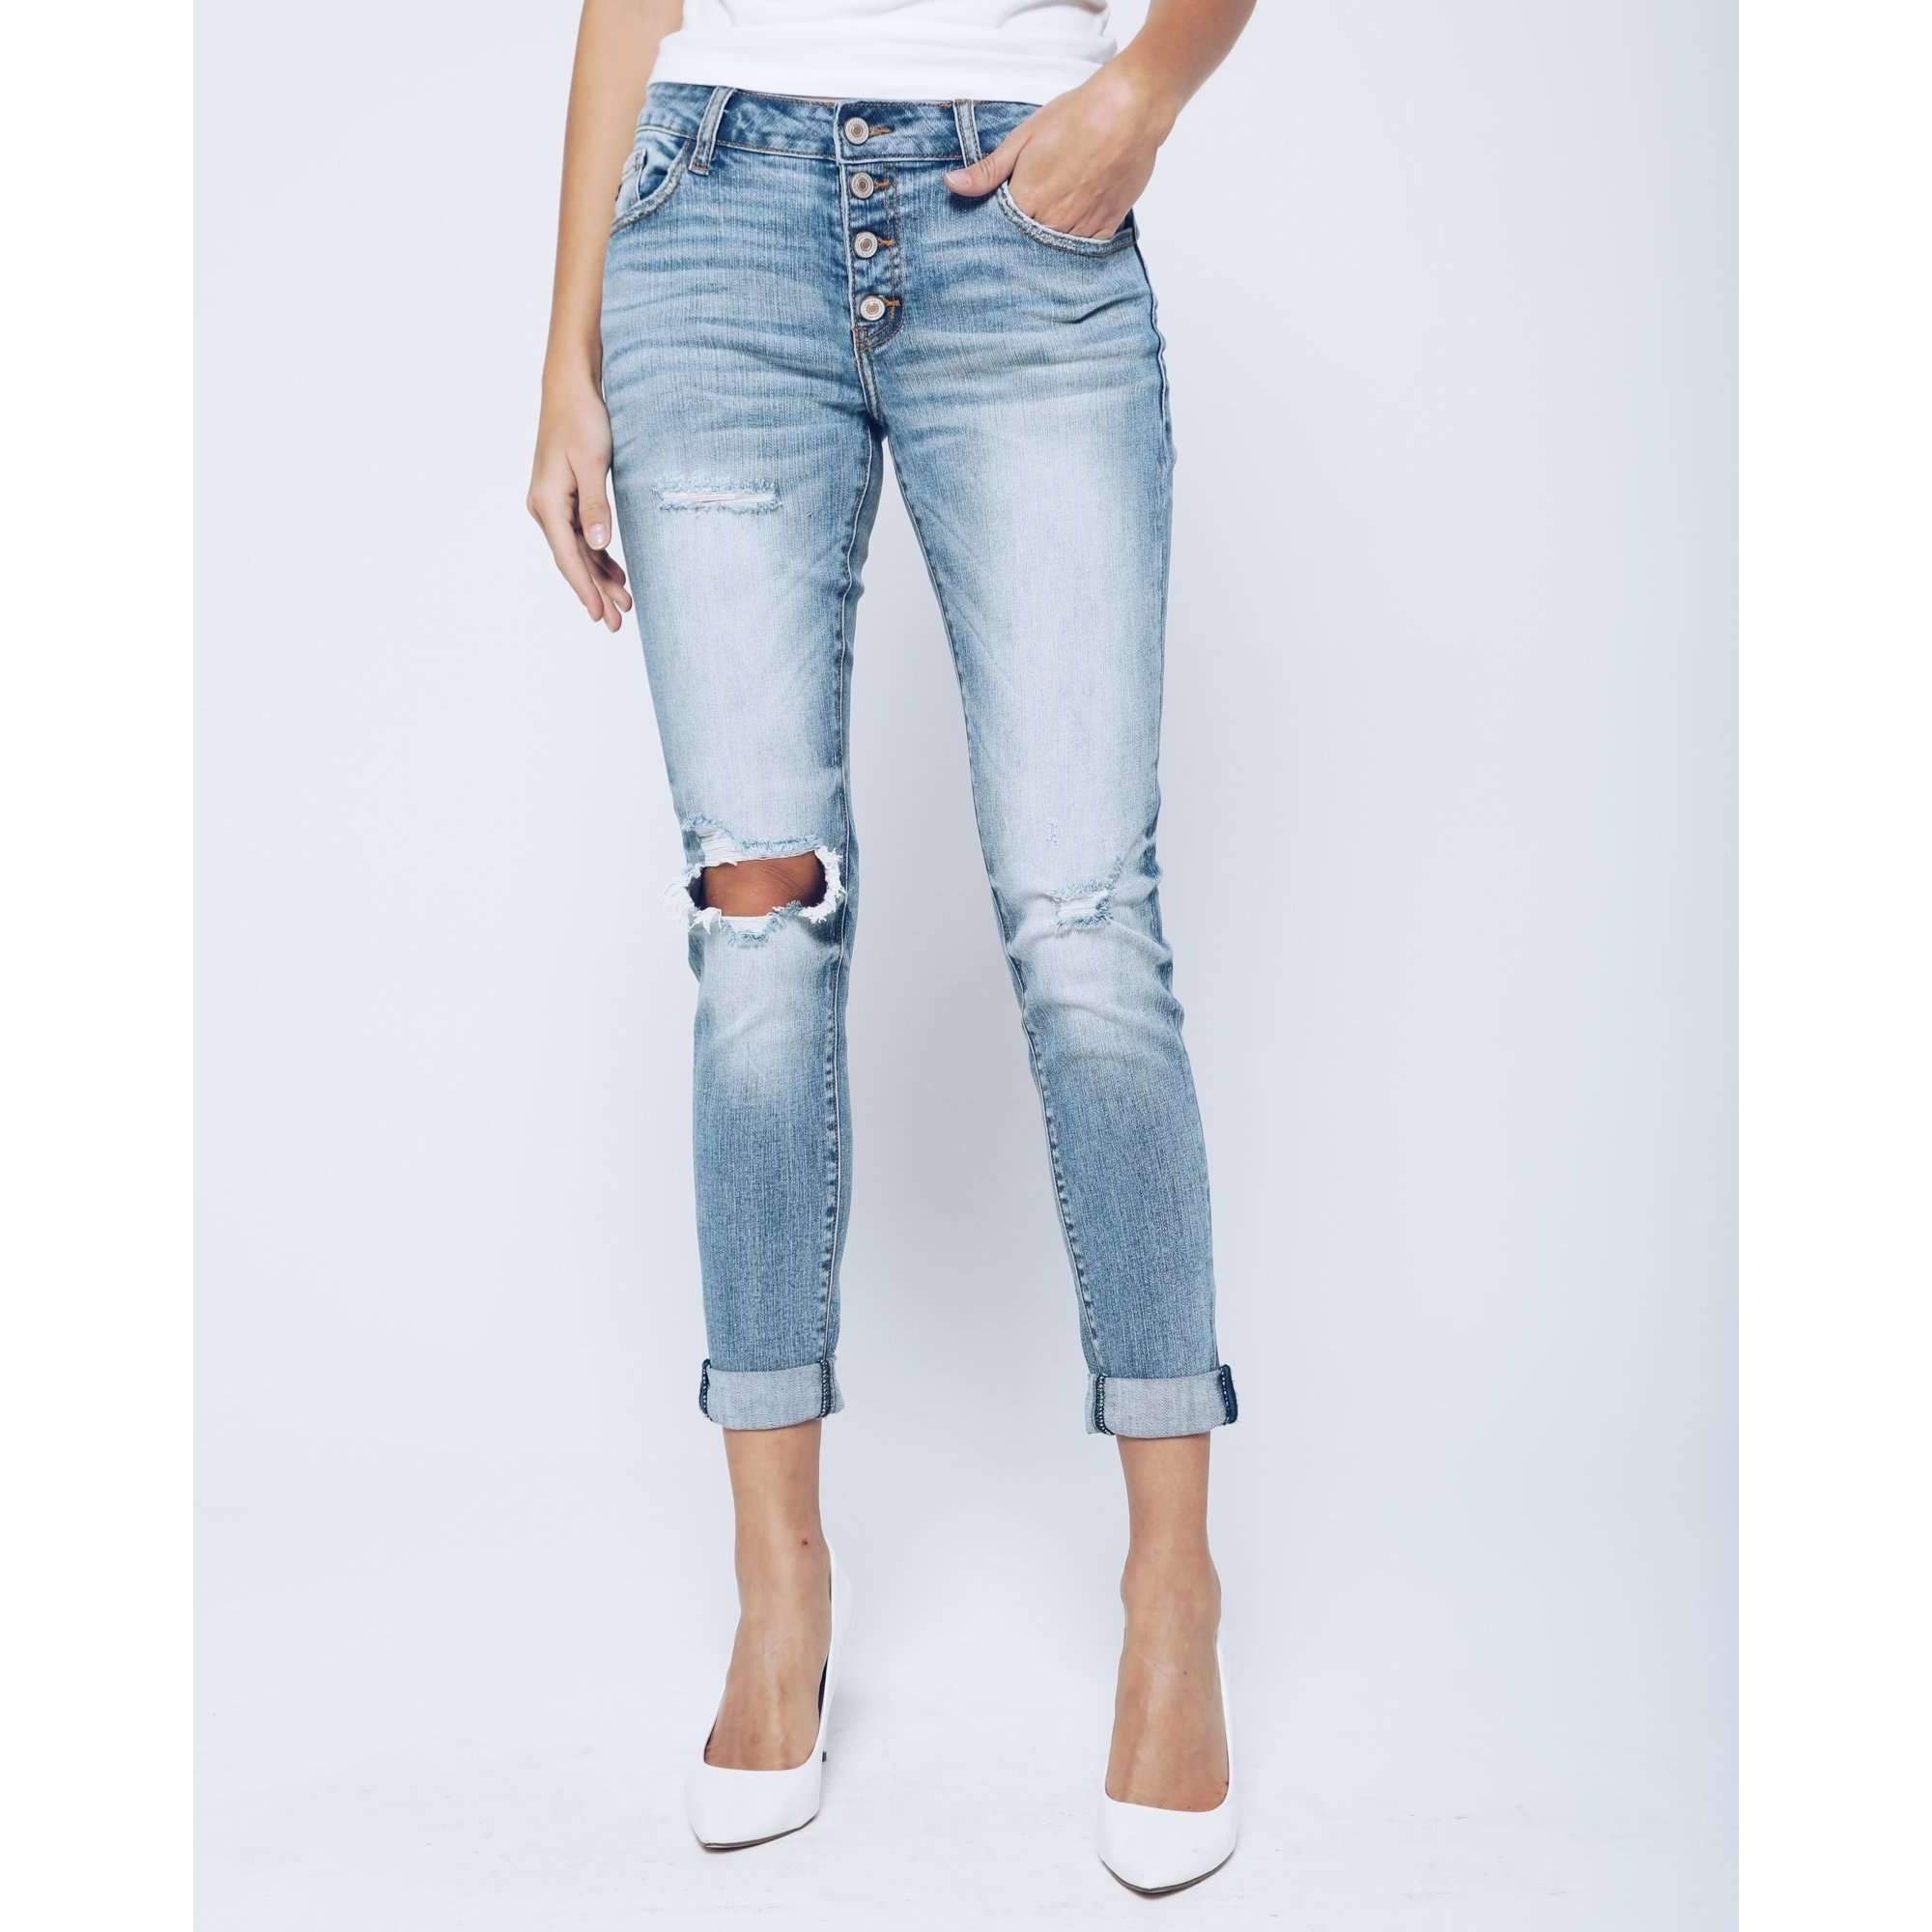 Distressed Faded Girlfriend Jeans